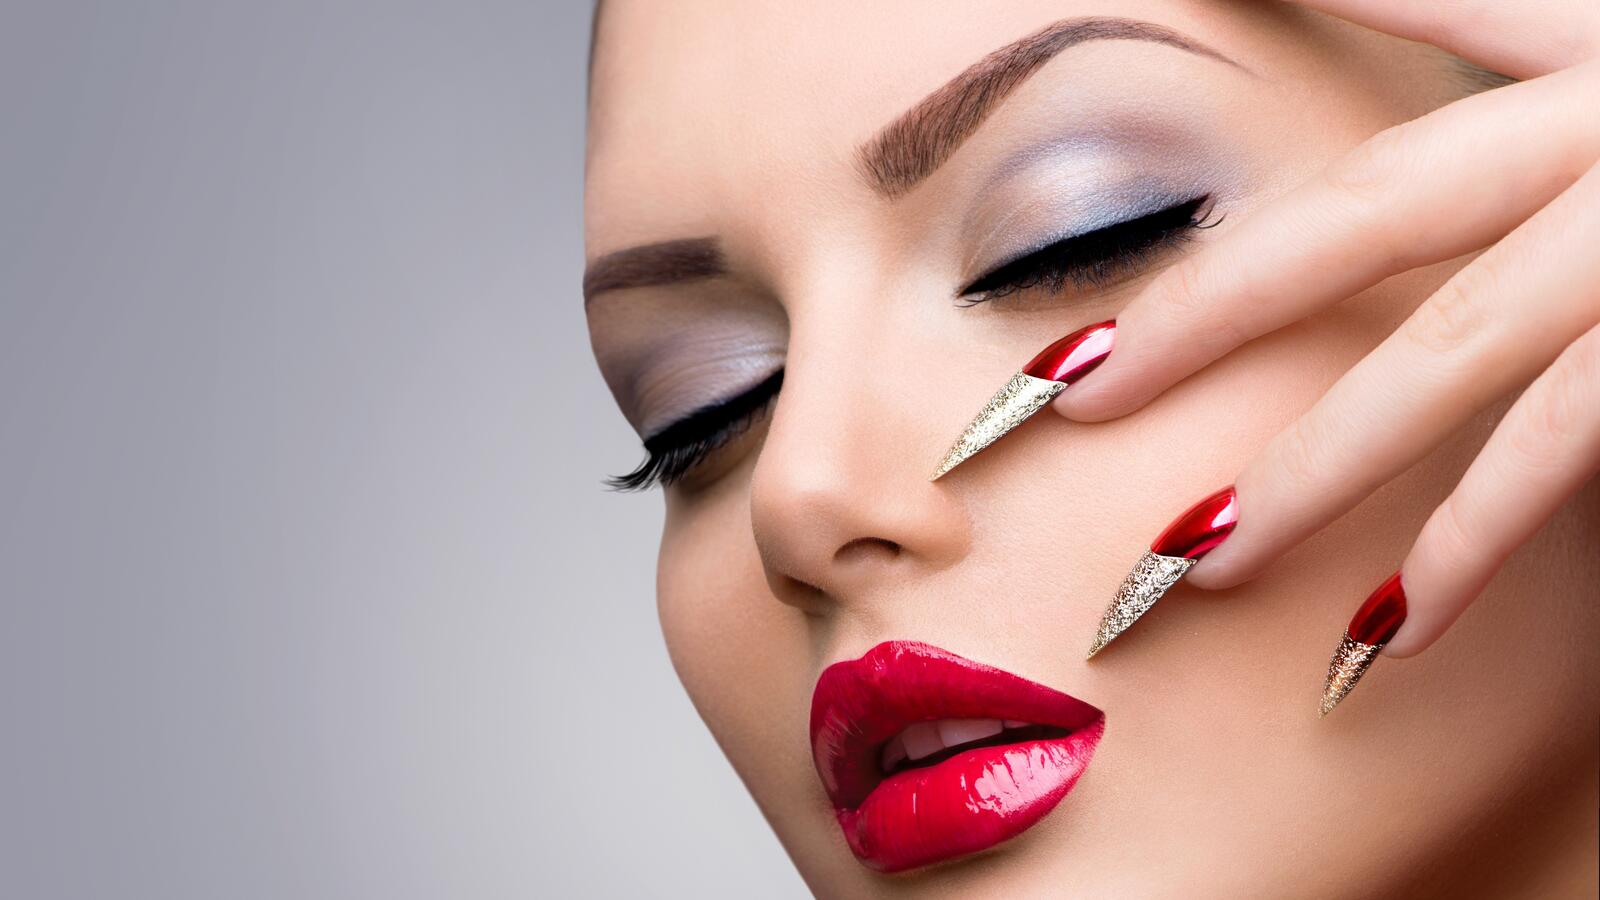 Free photo Model shows beautiful makeup and red manicure